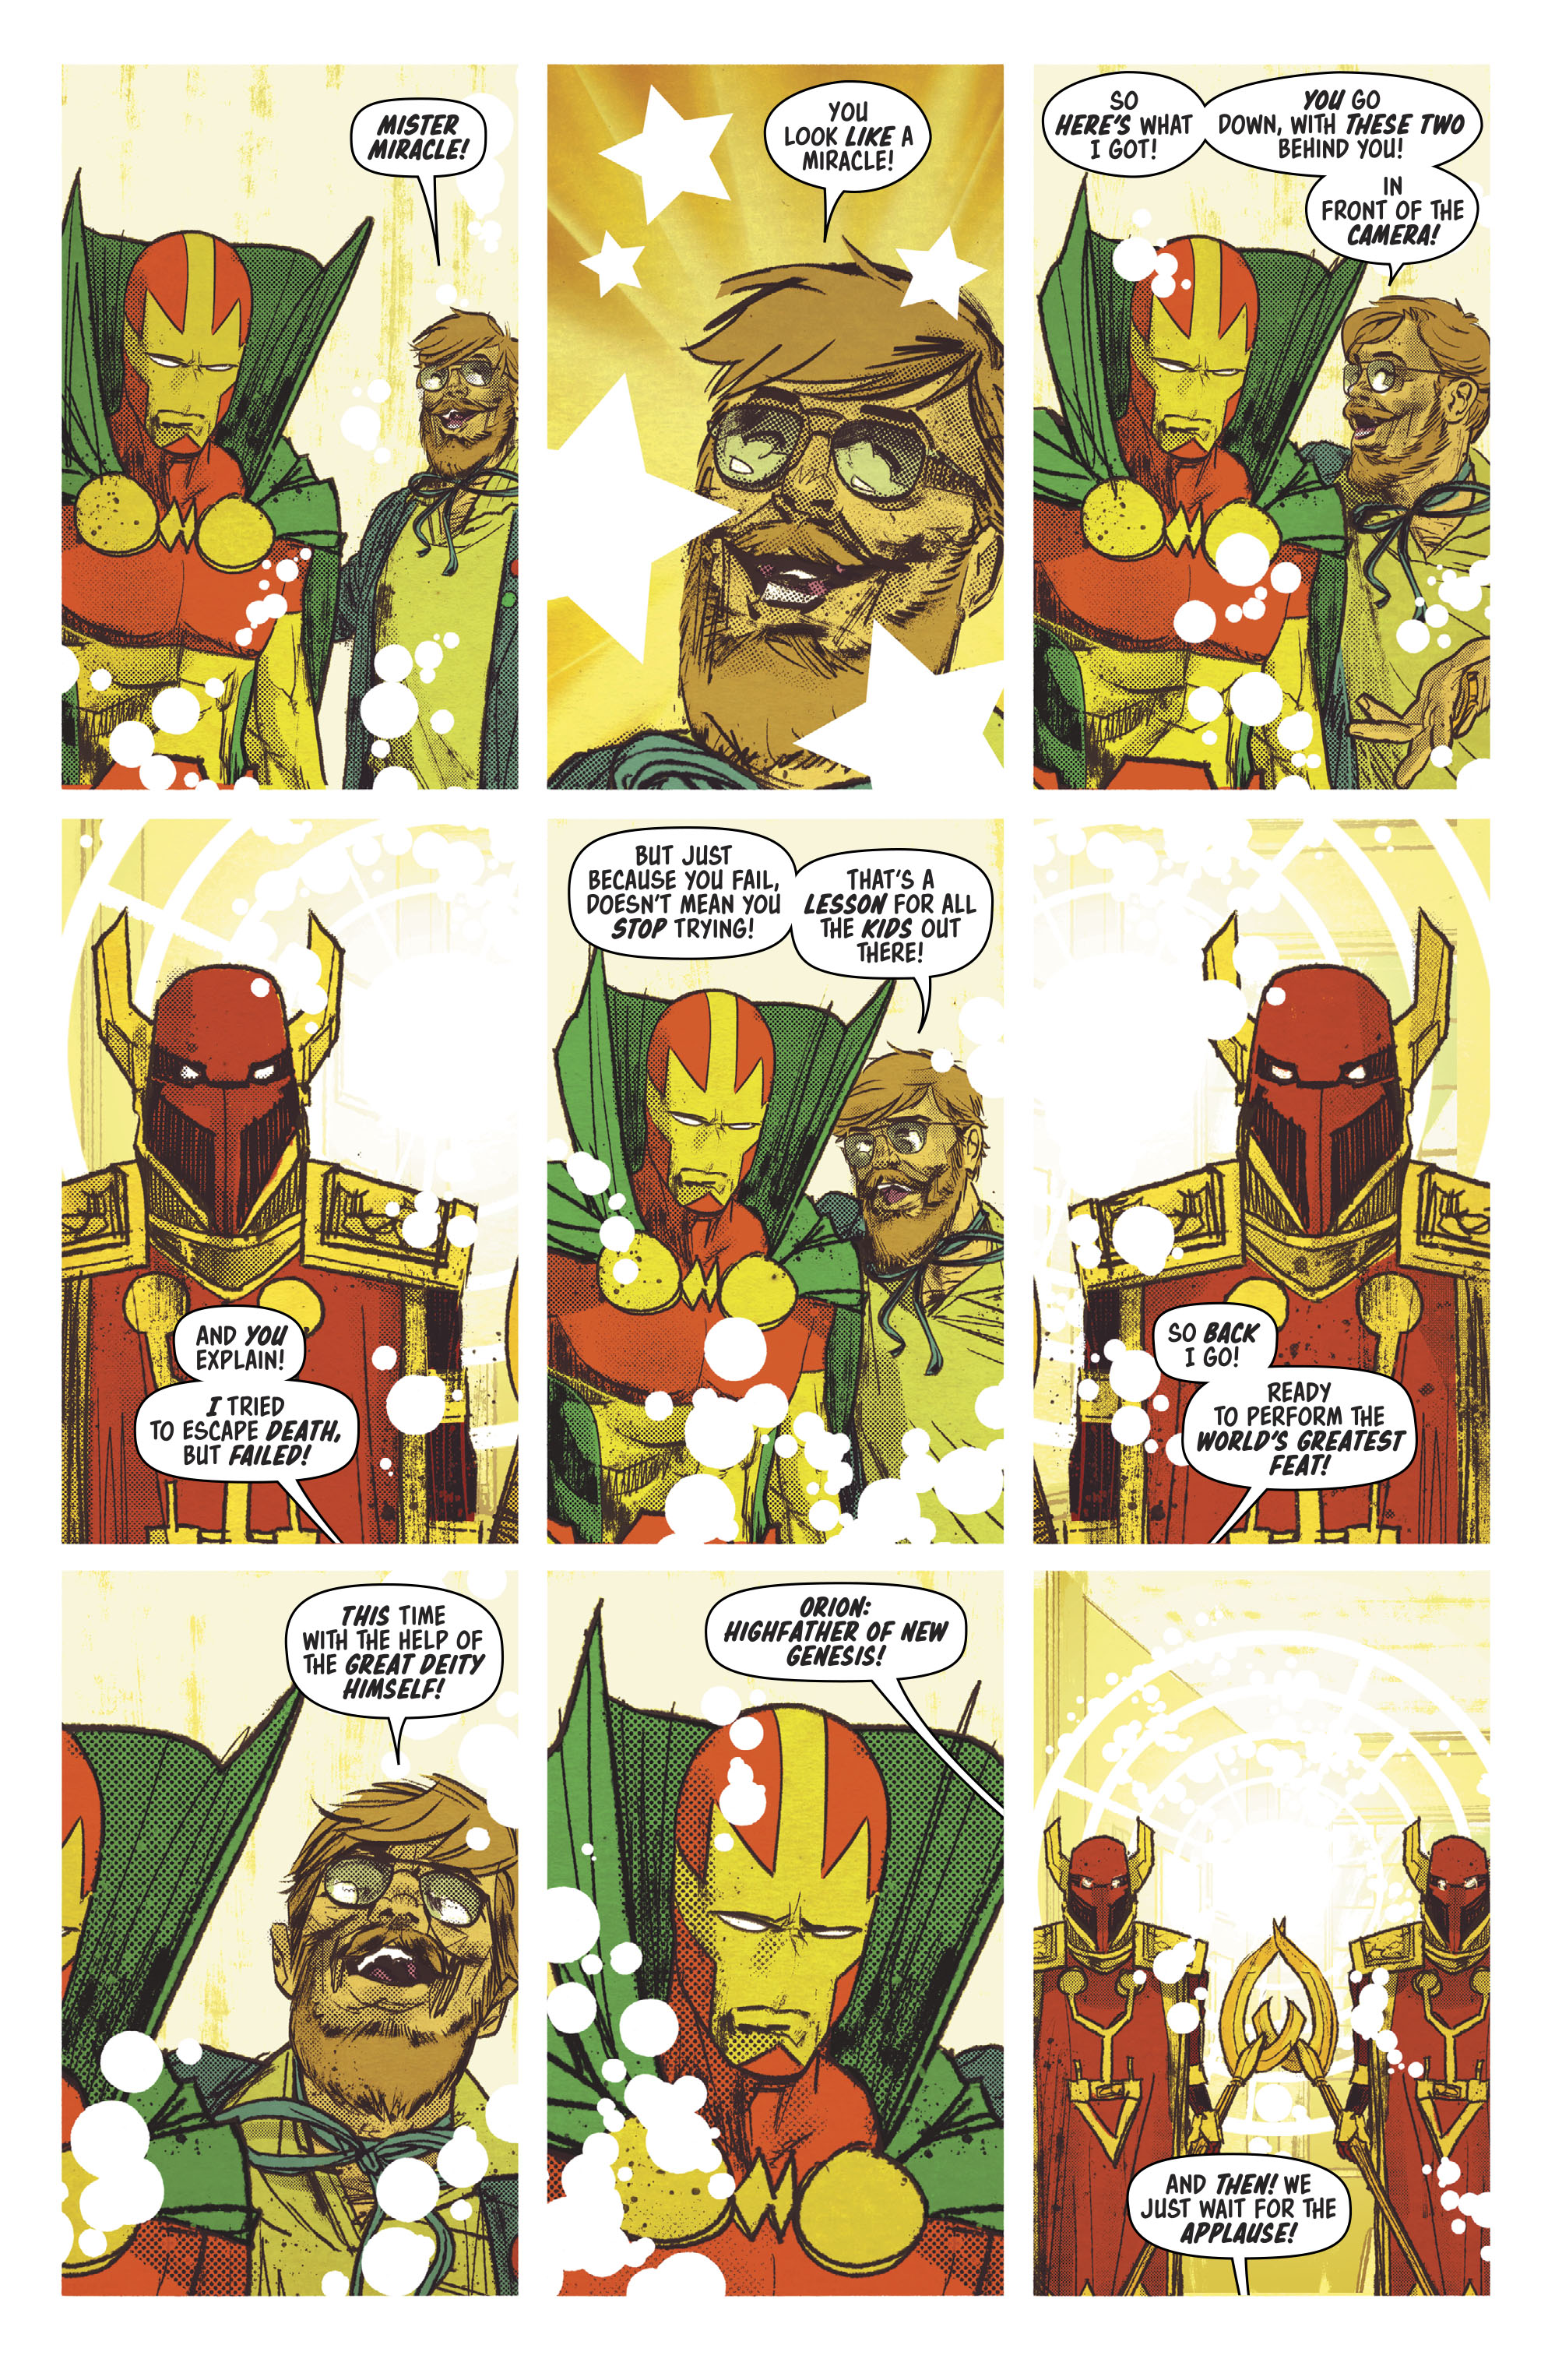 Mister Miracle 2017 005 023